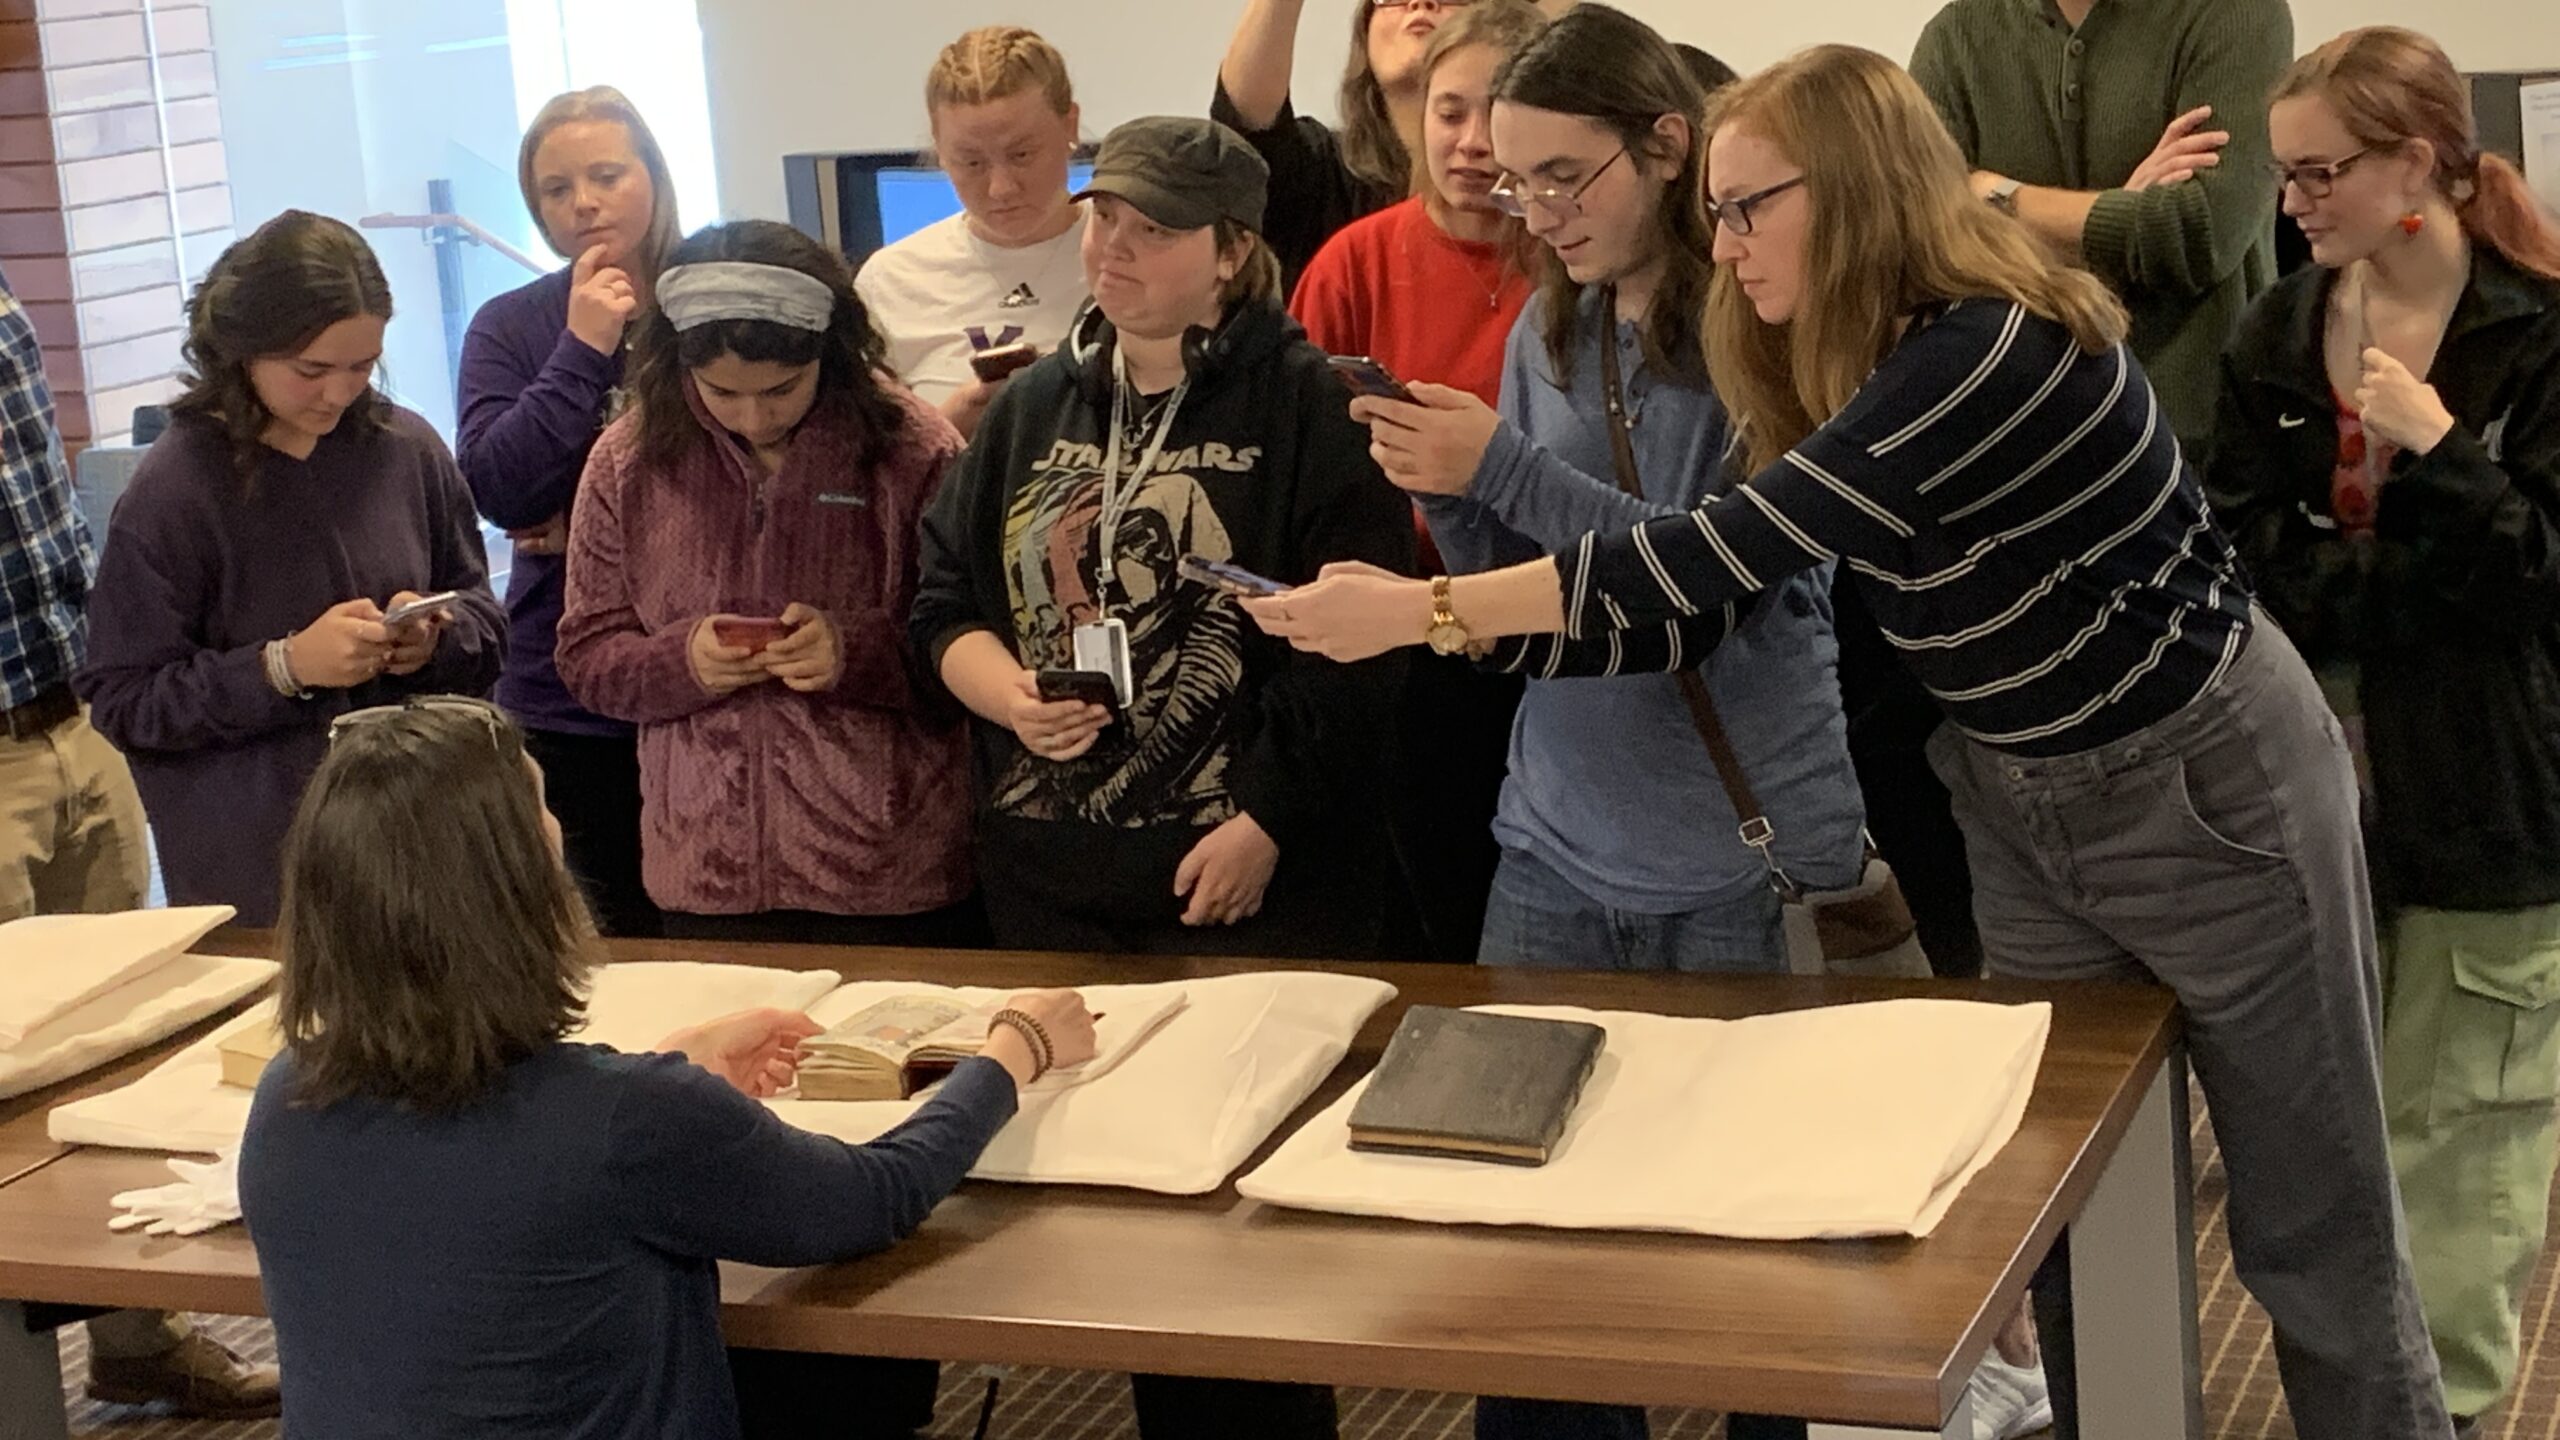 Students lean over a desk with their phones open to shoot photographs. On the desk is an open medieval manuscript